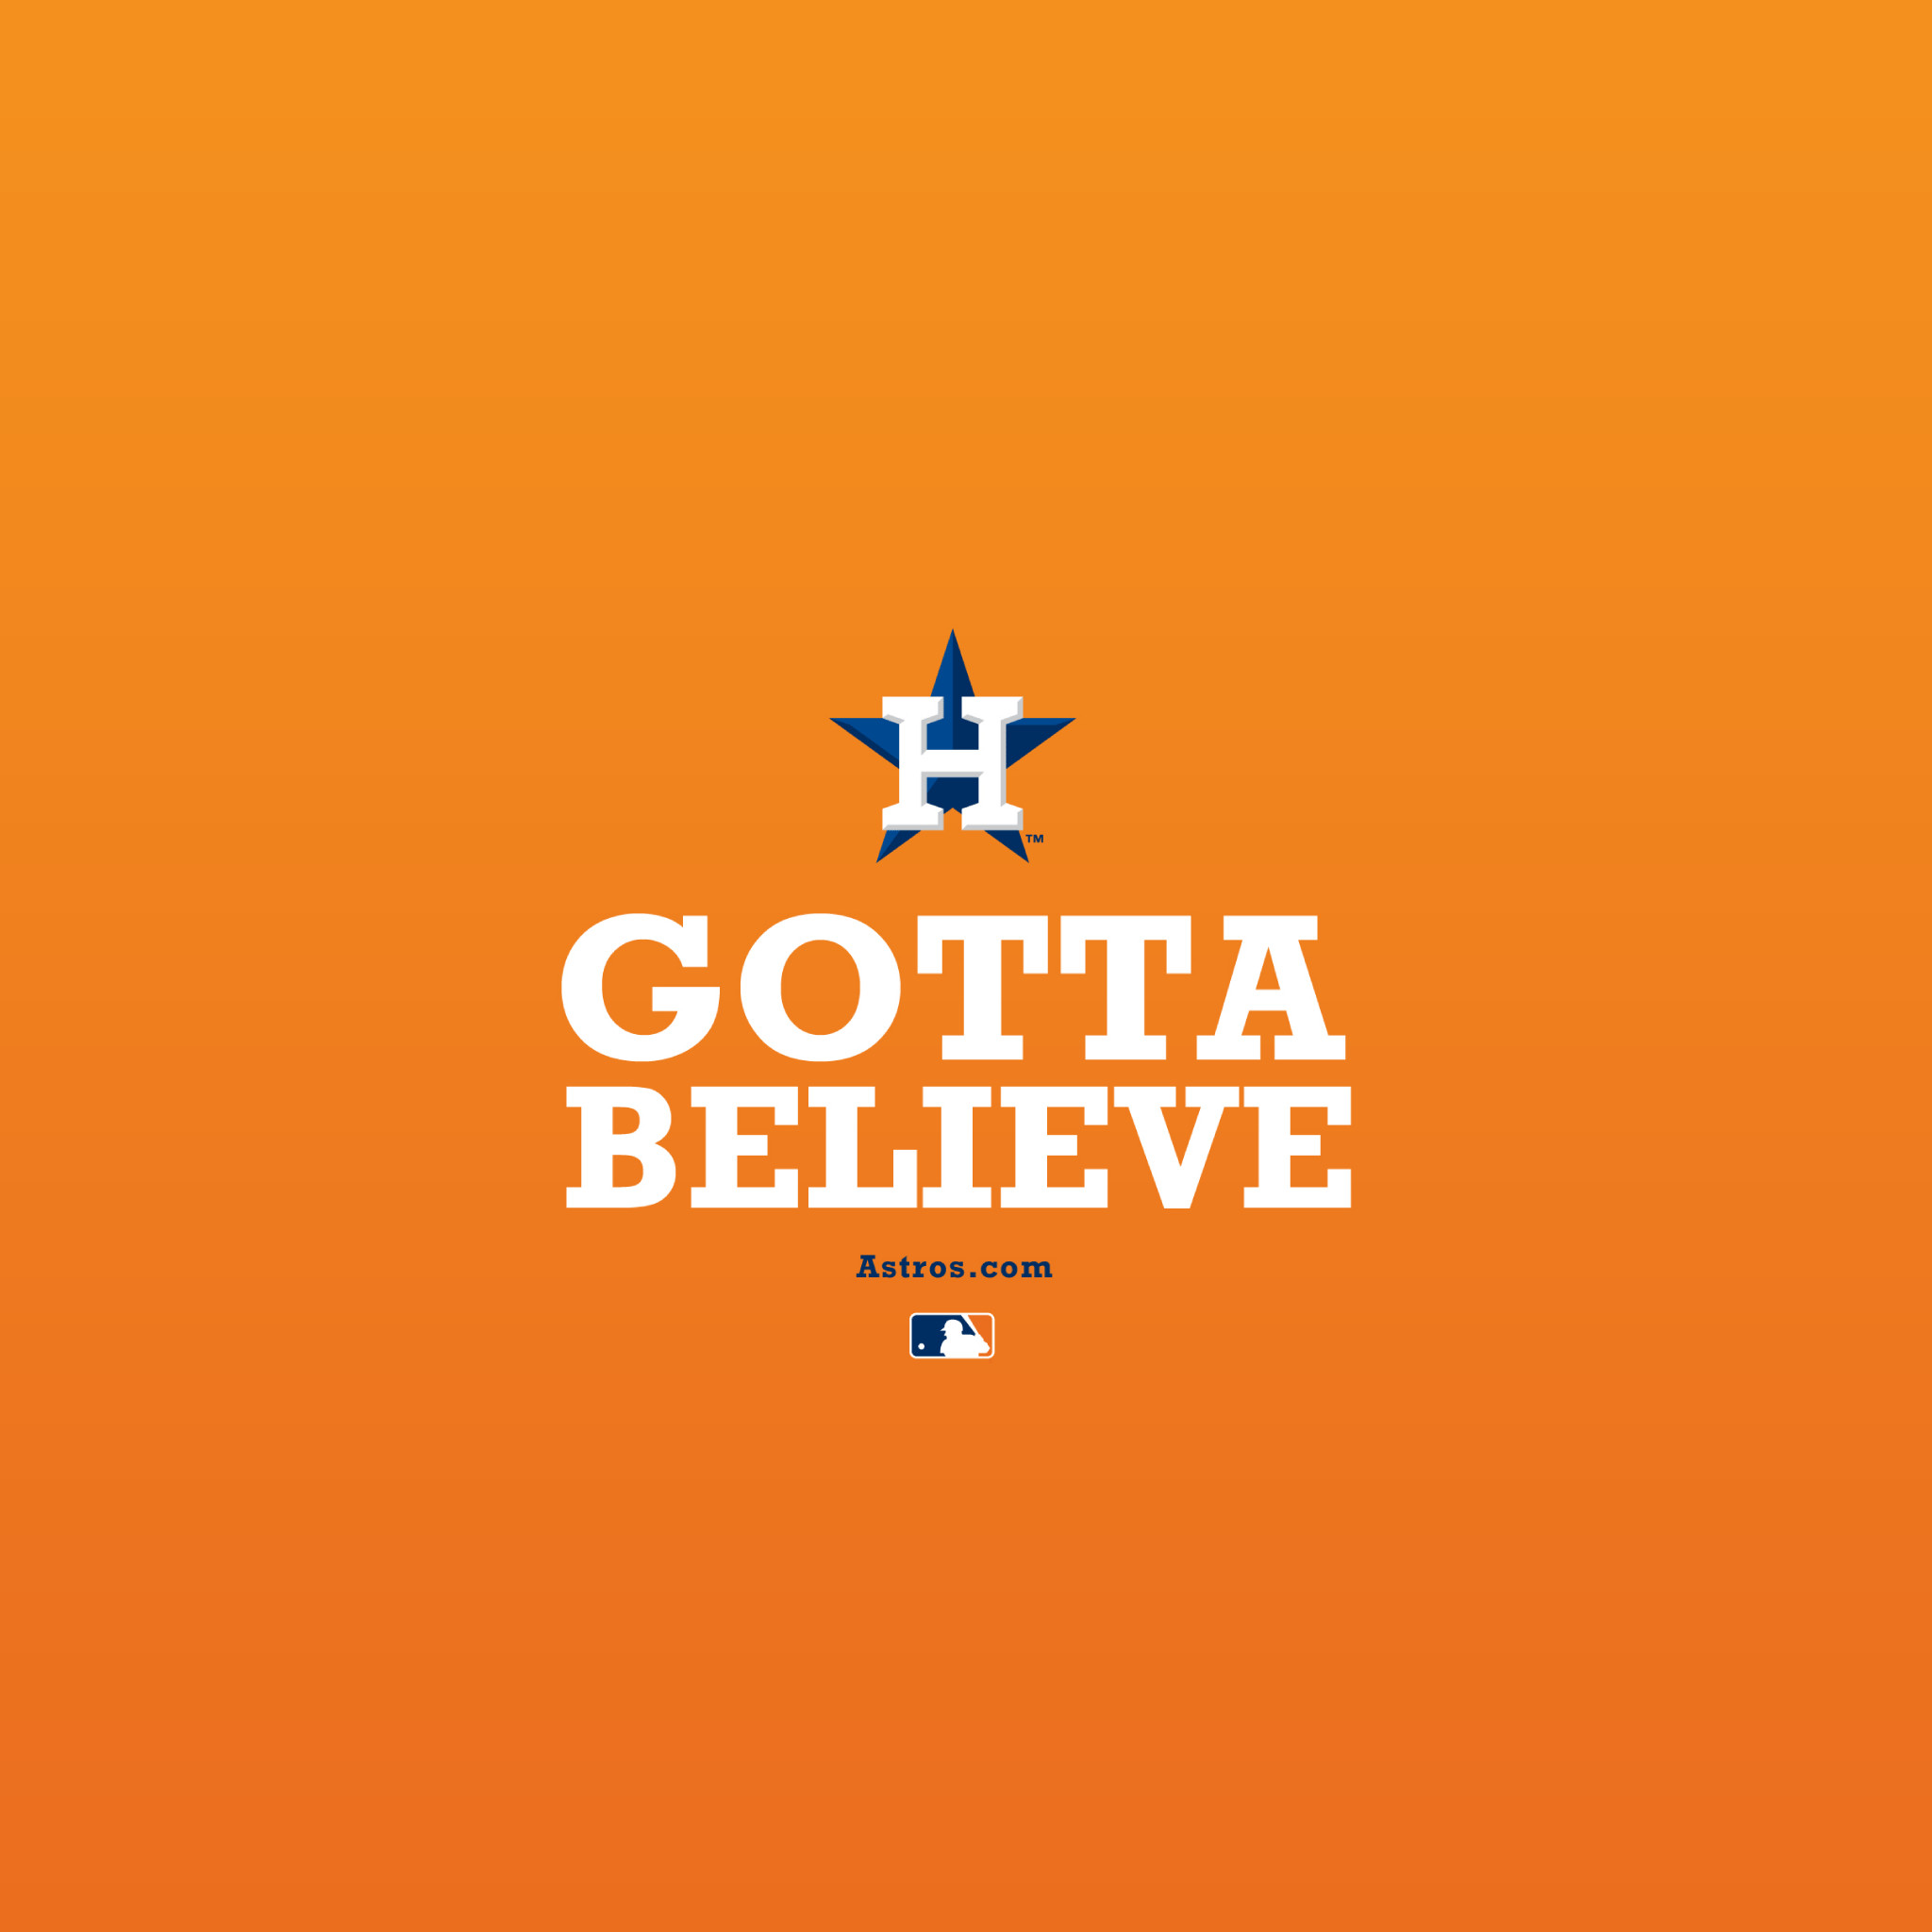 2048x2048 Astros Tablet Wallpaper - Players & Images 2014 | astros.com: Tickets